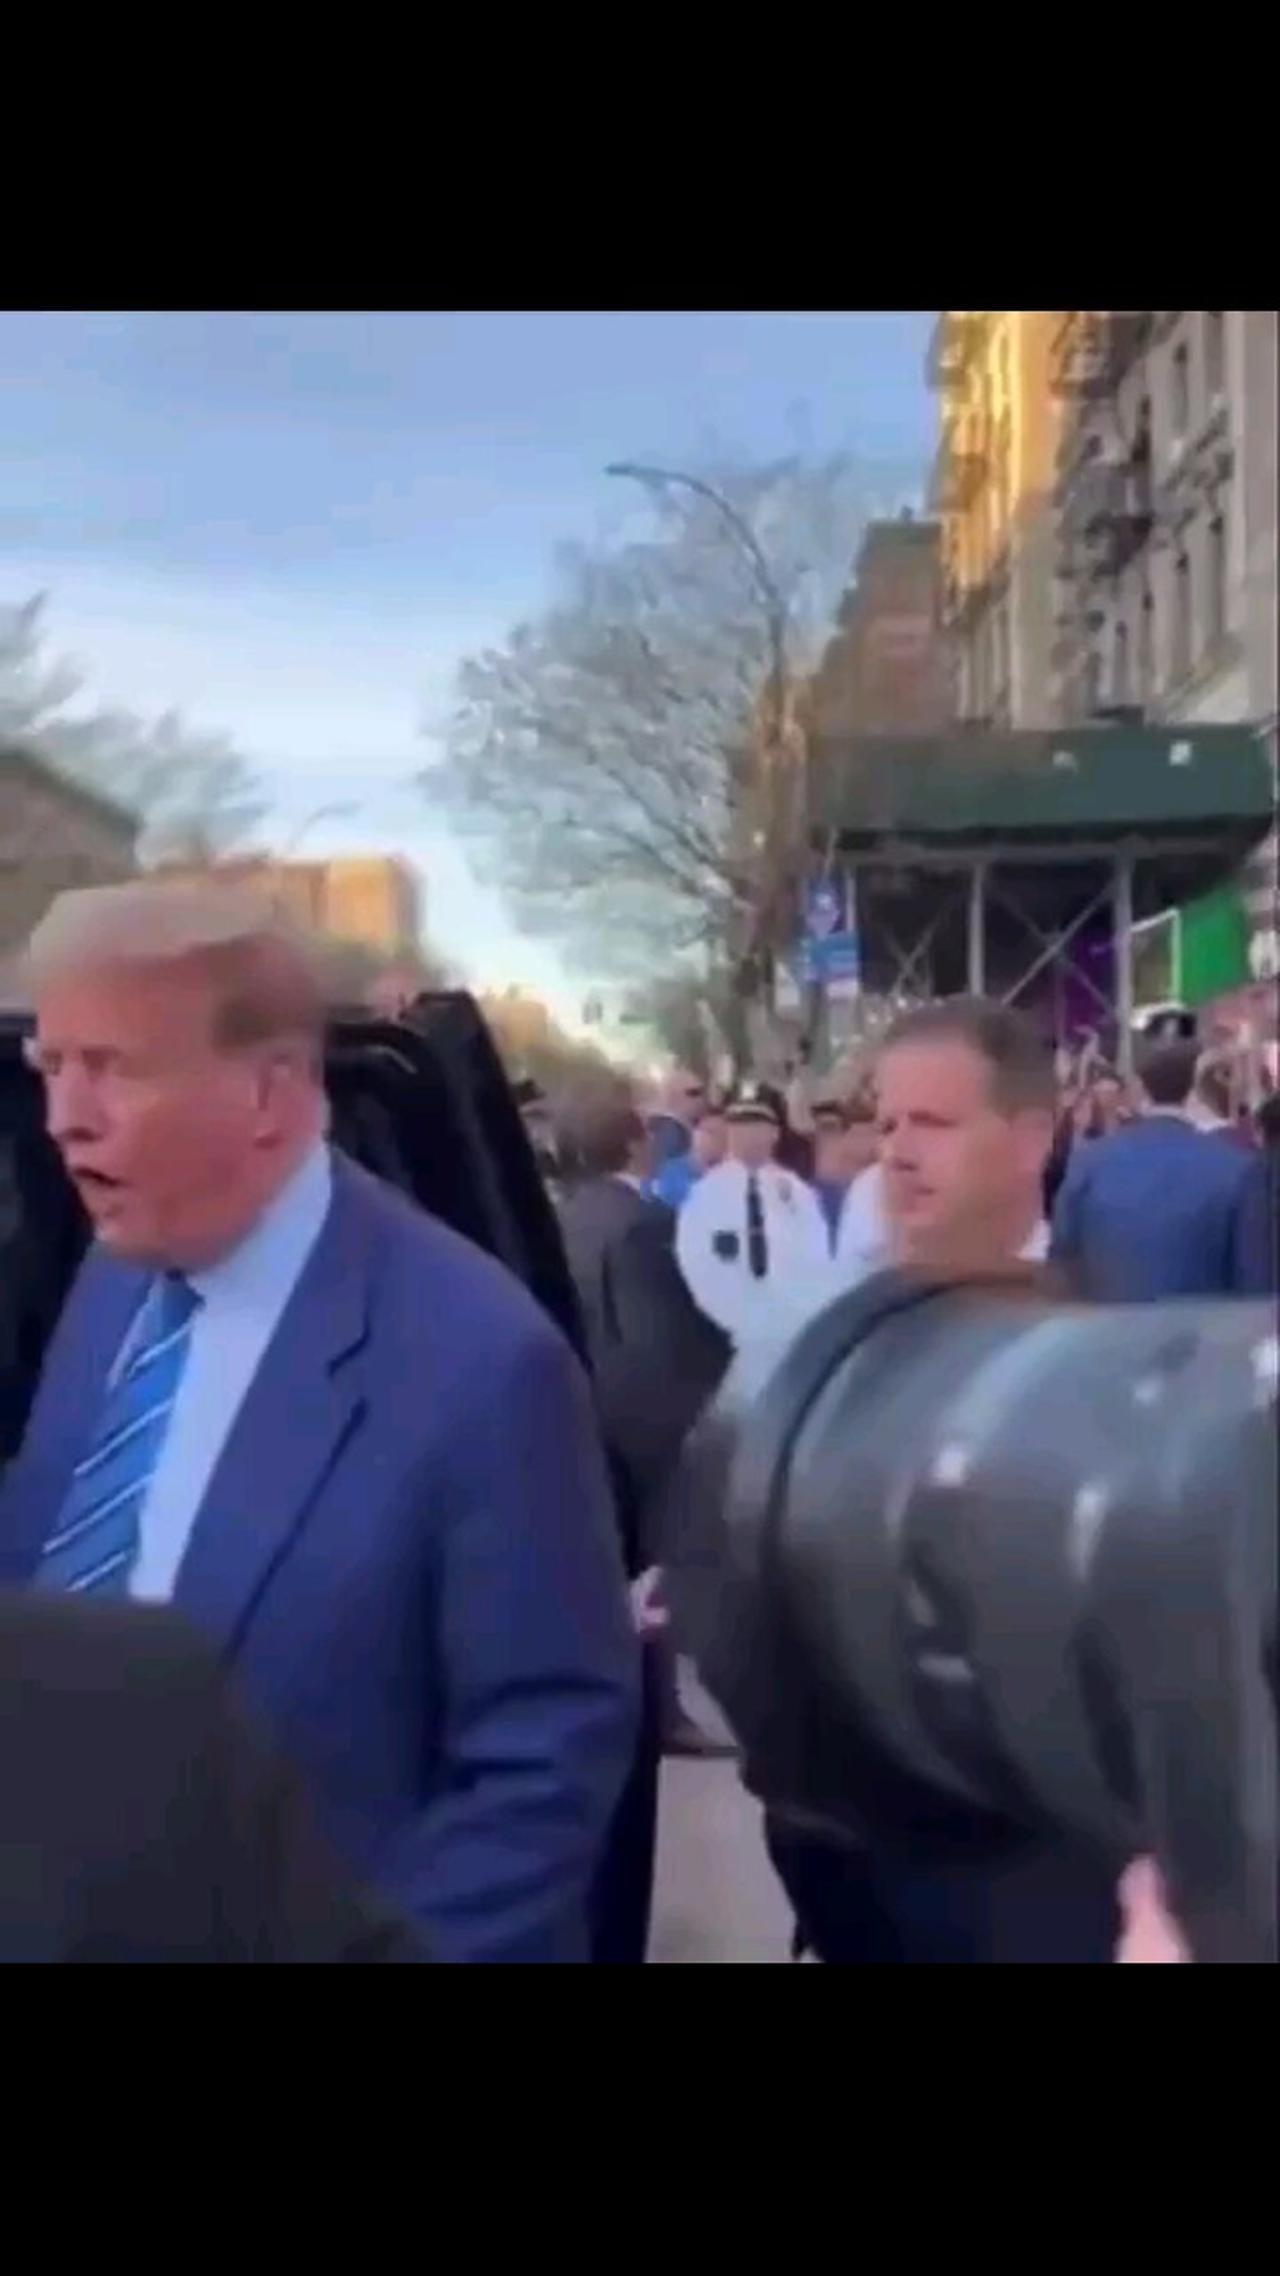 PresidentTrump stops in his tracks when he sees NYPDOfficers I love you guys! You guys are the best!